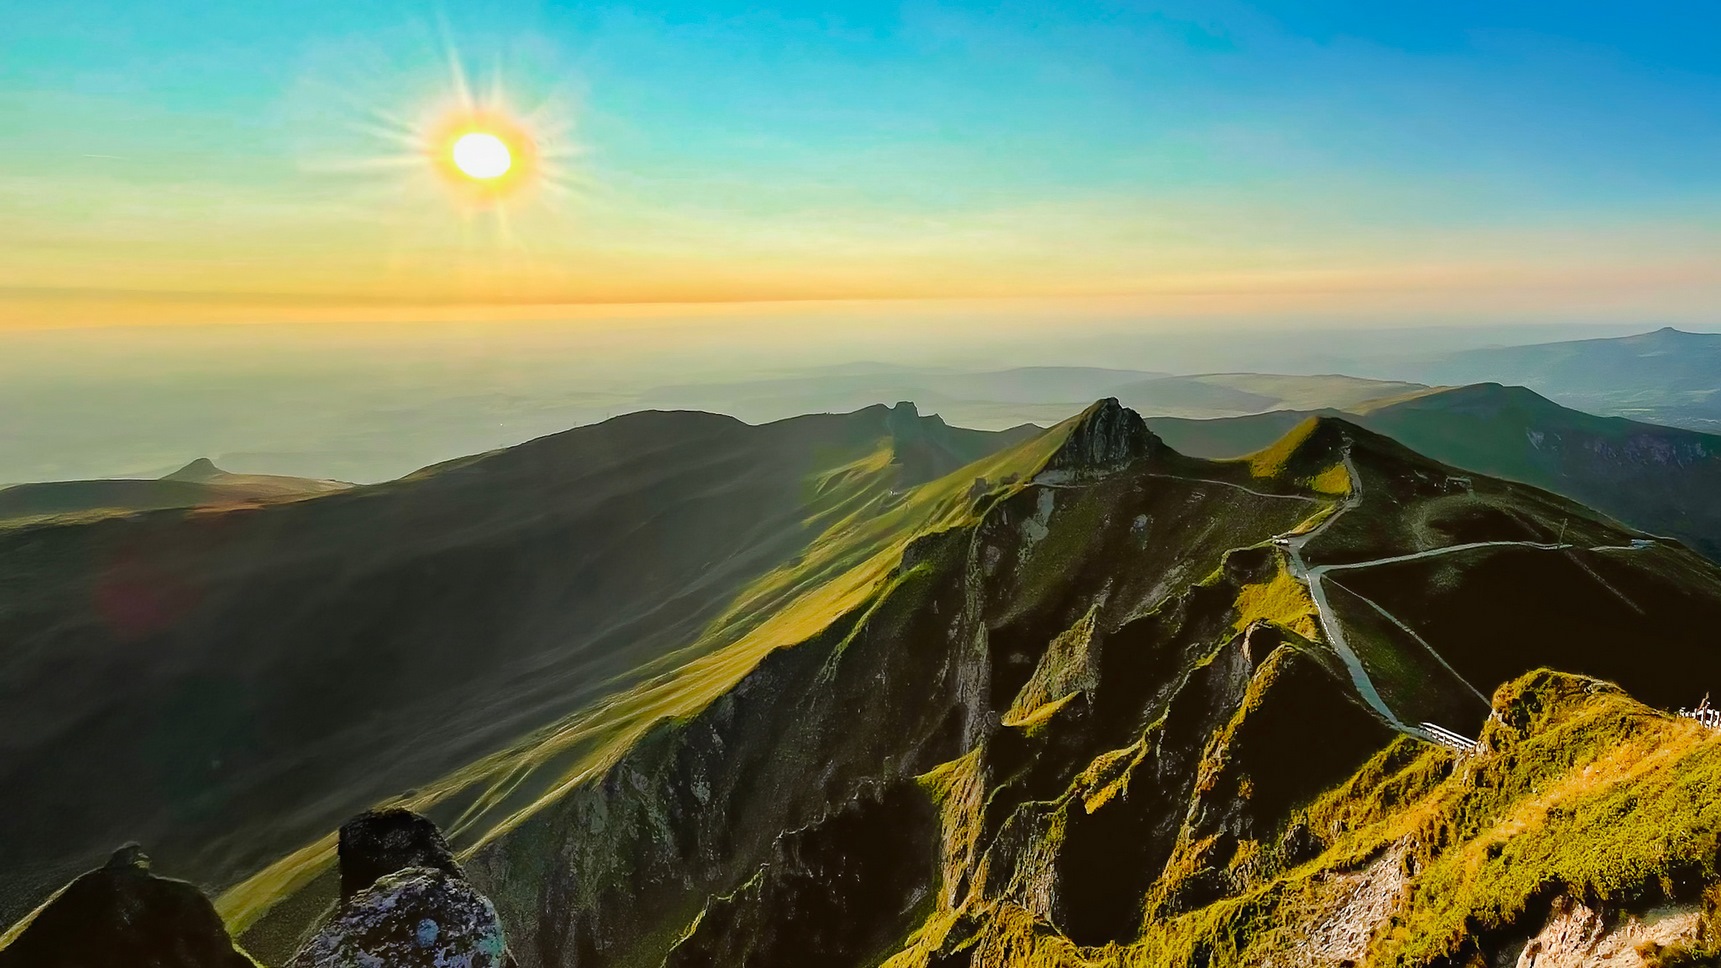 At the top of the Puy de Sancy, sunset over the peaks of the Massif du Sancy